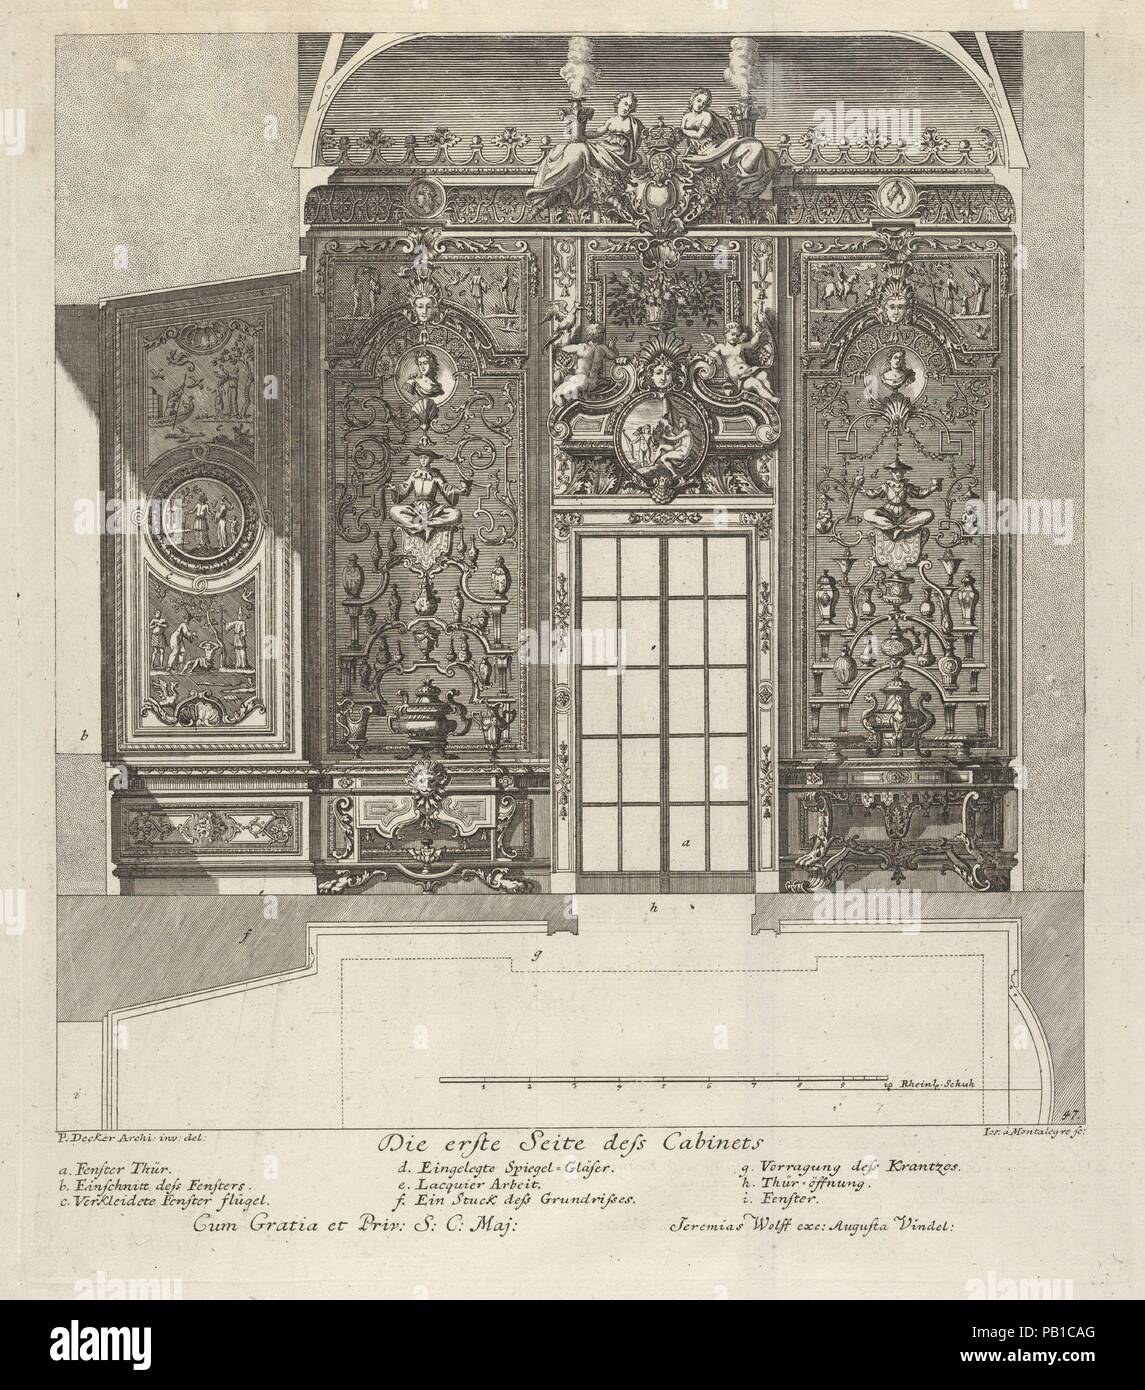 The First Wall of the Porcelain Room, from: 'Fürstlicher Baumeister Oder: Architectura civilis'. Artist: Paul Decker the Elder (German, 1677-1713). Dimensions: Plate: 13 × 11 3/8 in. (33 × 28.9 cm). Engraver: Joseph de Montalegre (German, born Prague, active ca. 1710-after 1724). Printer: Peter Detleffsen. Published in: Augsburg. Publisher: Jeremias Wolff (German, 1663-1724). Date: 1711.  This print comes from a book, published in Augsburg in 1711 under the title Fürstlicher Baumeister Oder: Architectura civilis (The Princely Architect or: Civil Architecture). In its essence this book contains Stock Photo